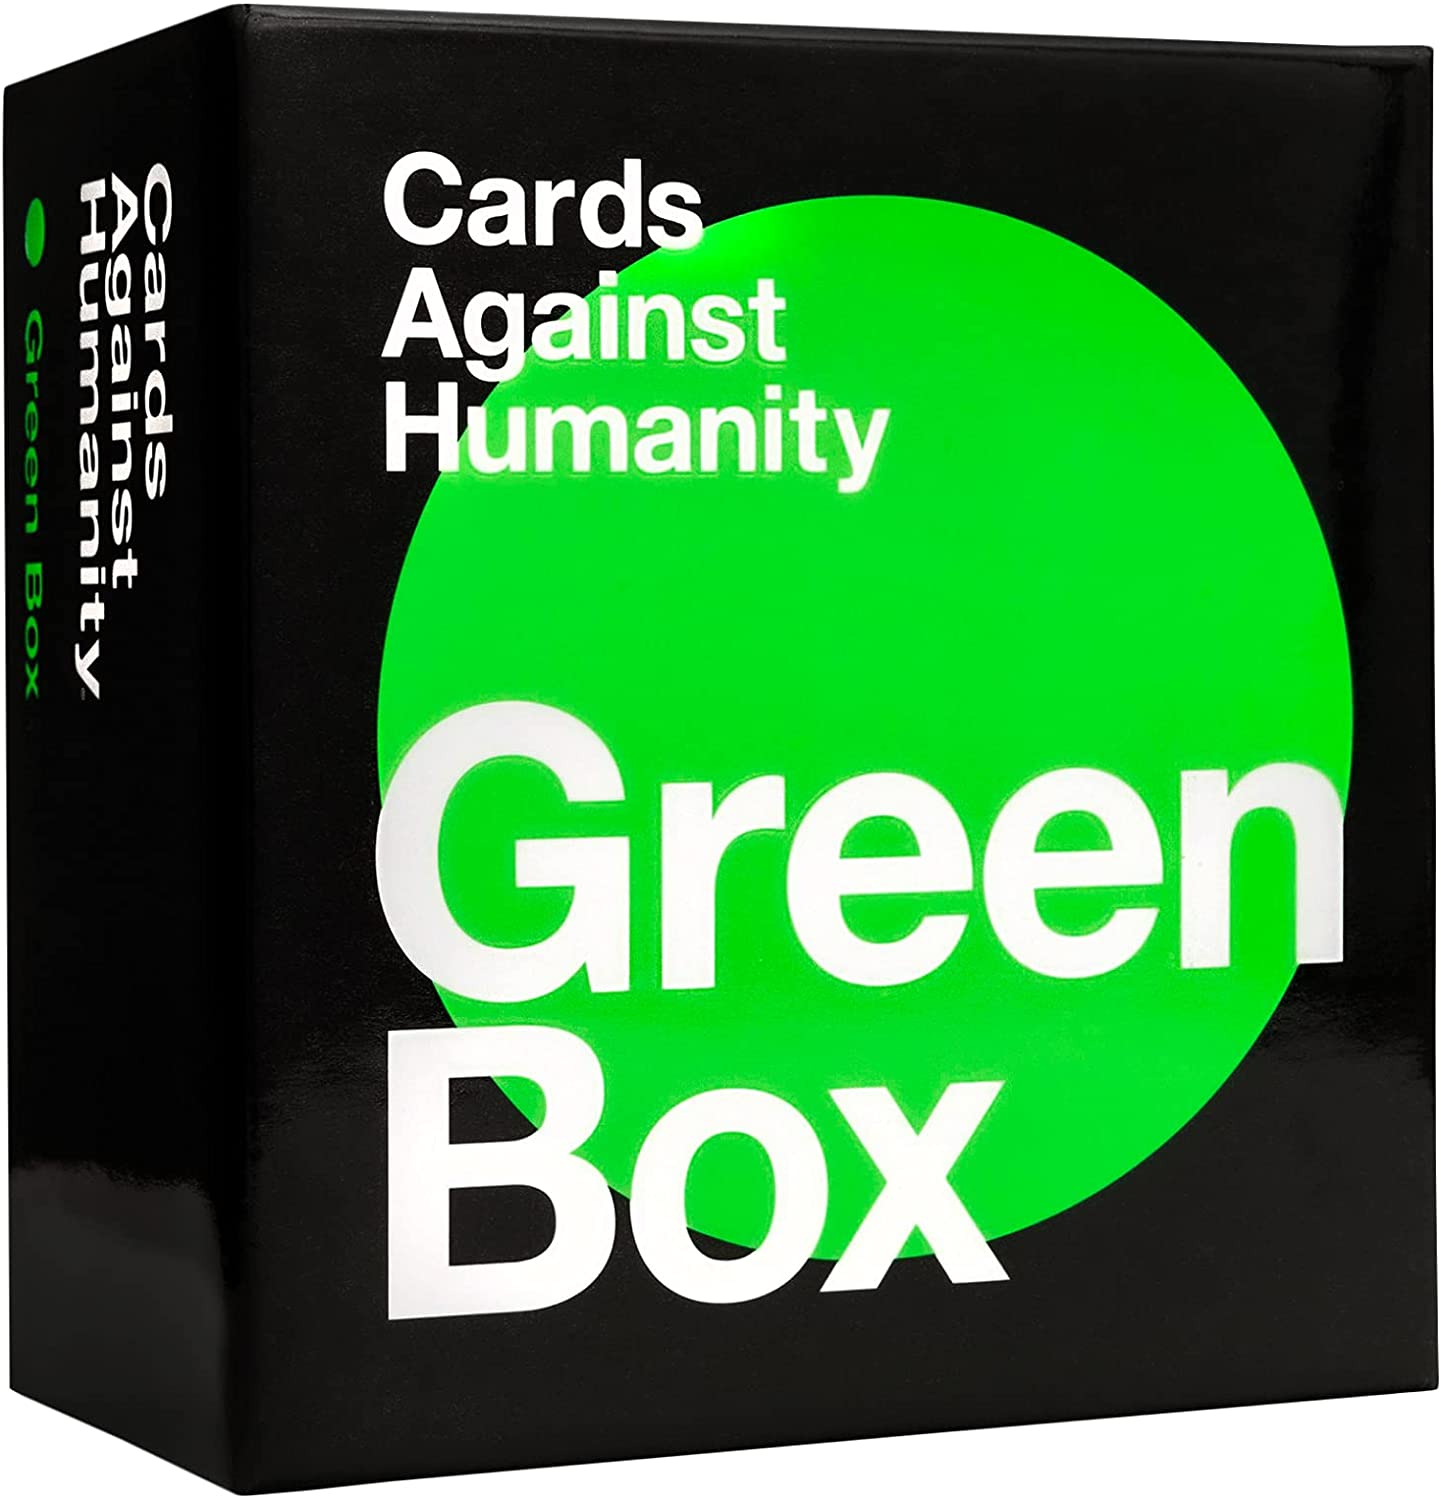 Cards Against Humanity uitbreiding - Green Box